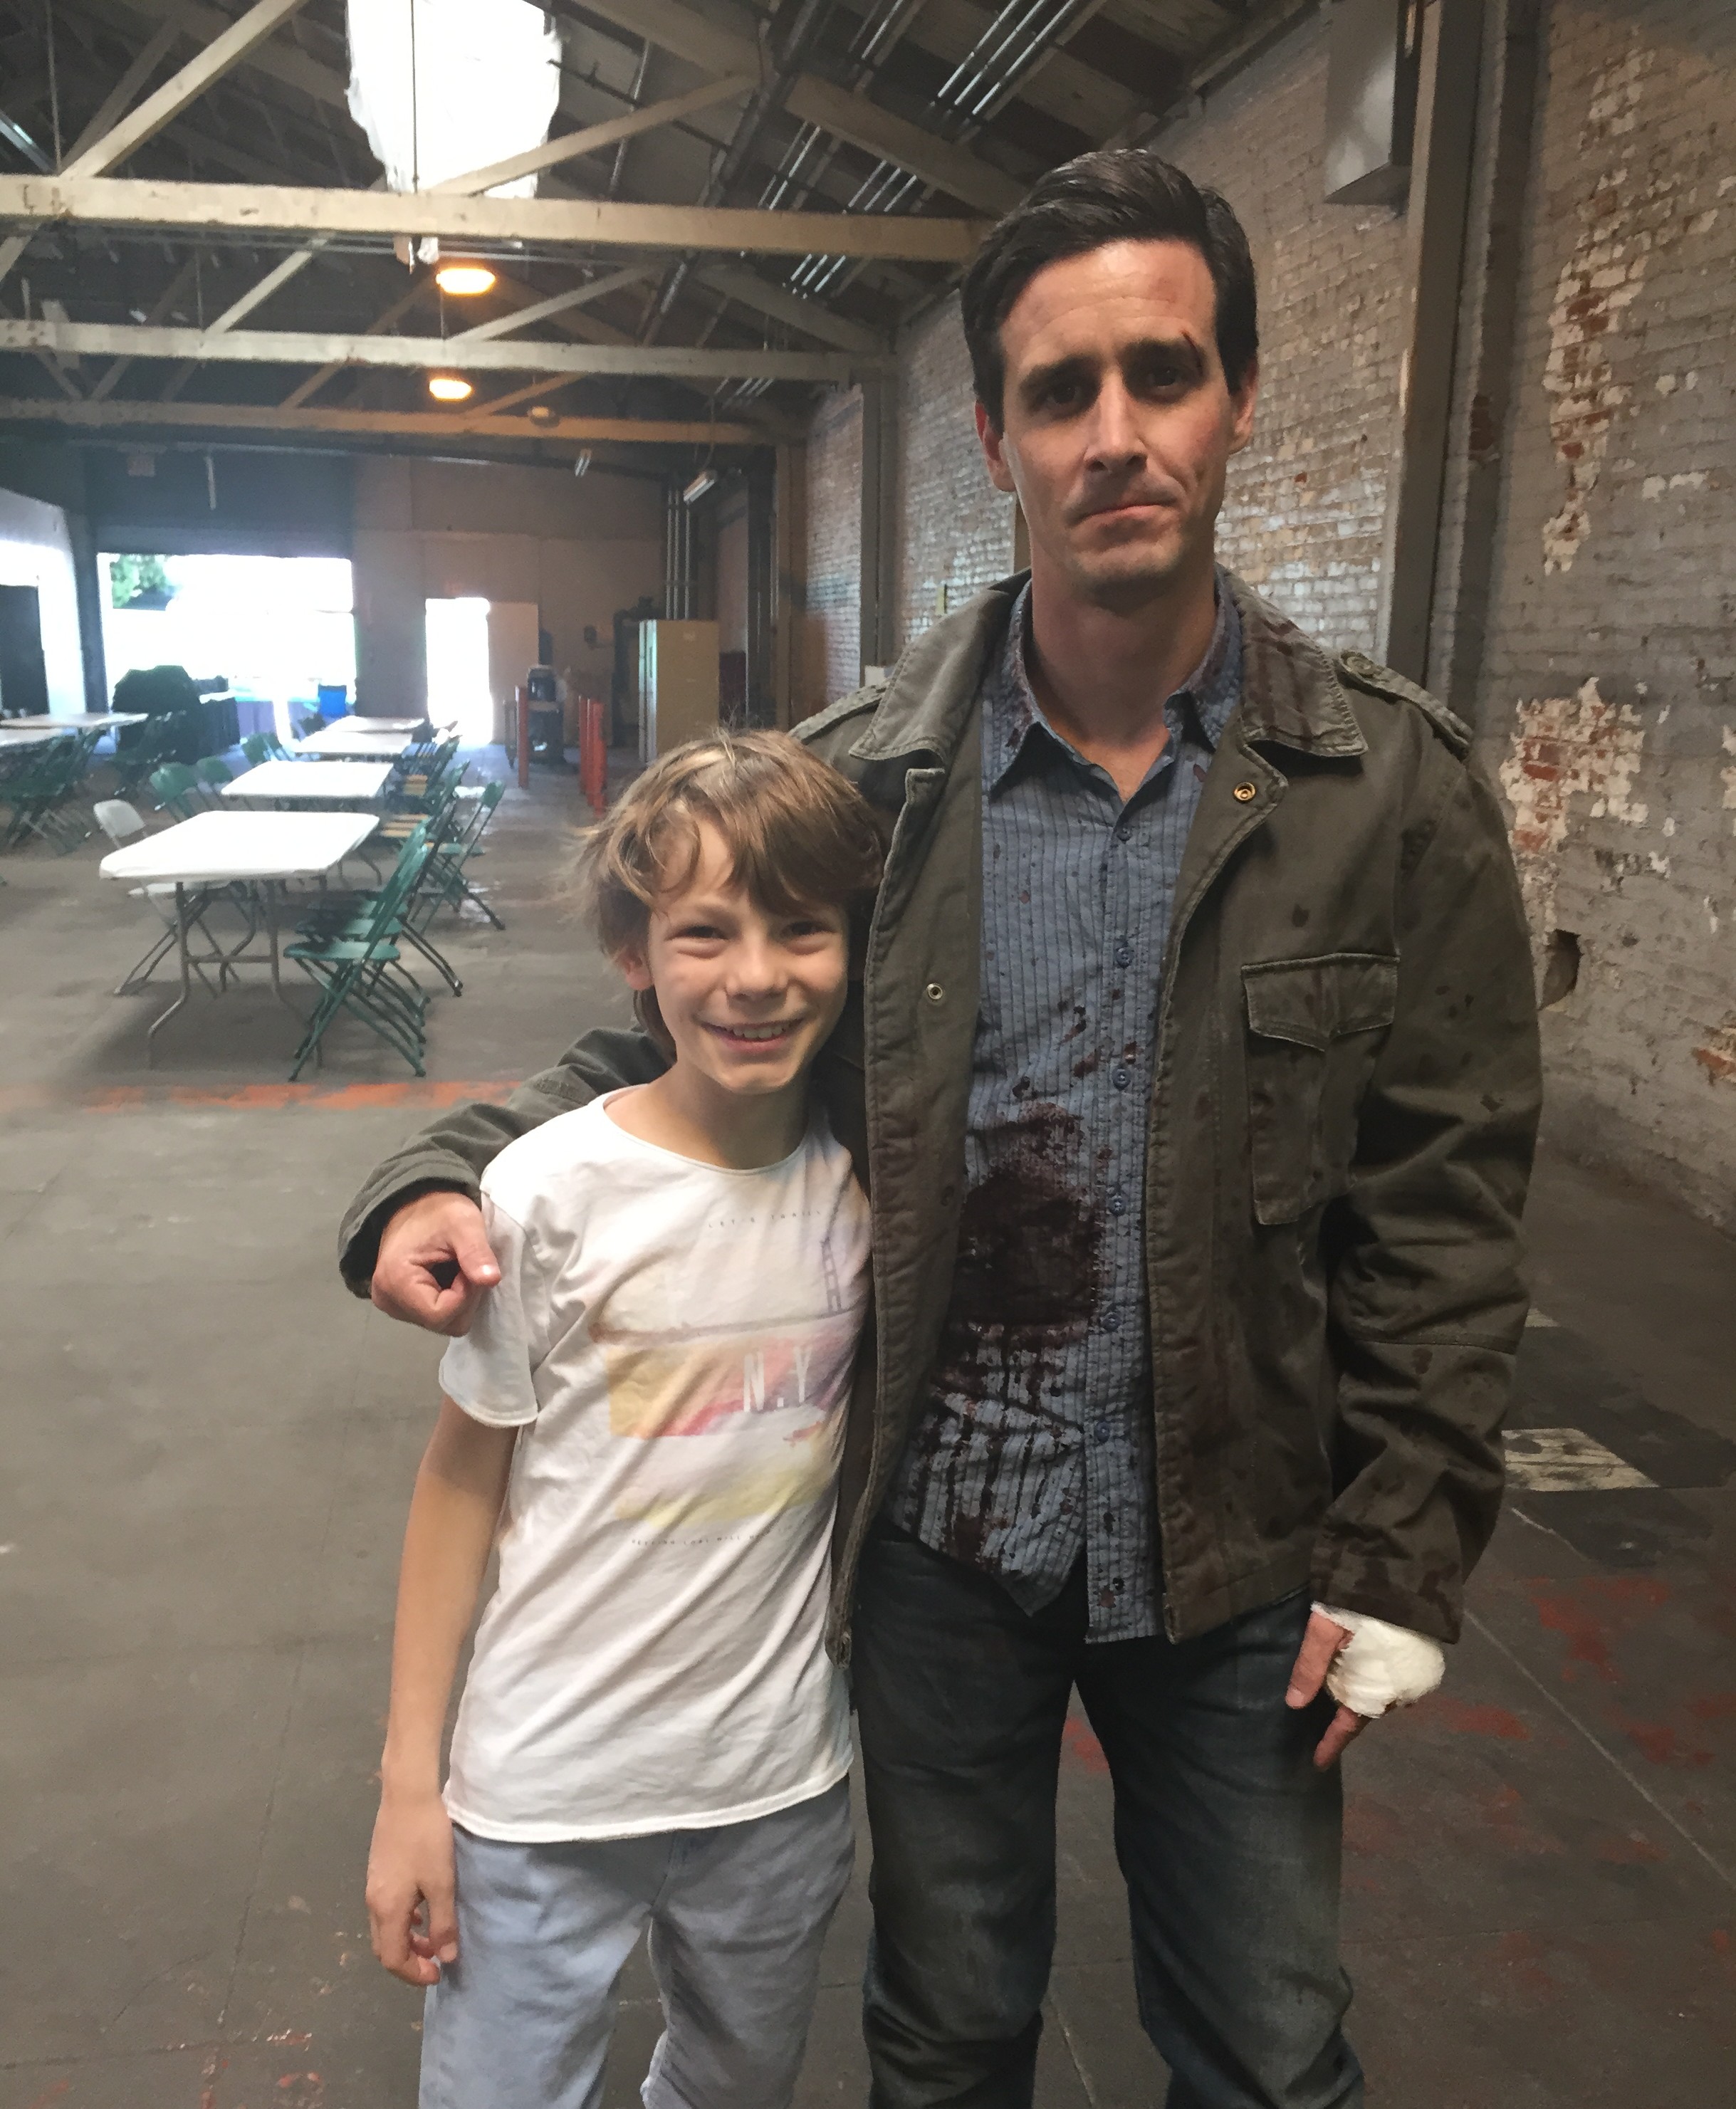 Sinister 2 filming in LA with James Ransone